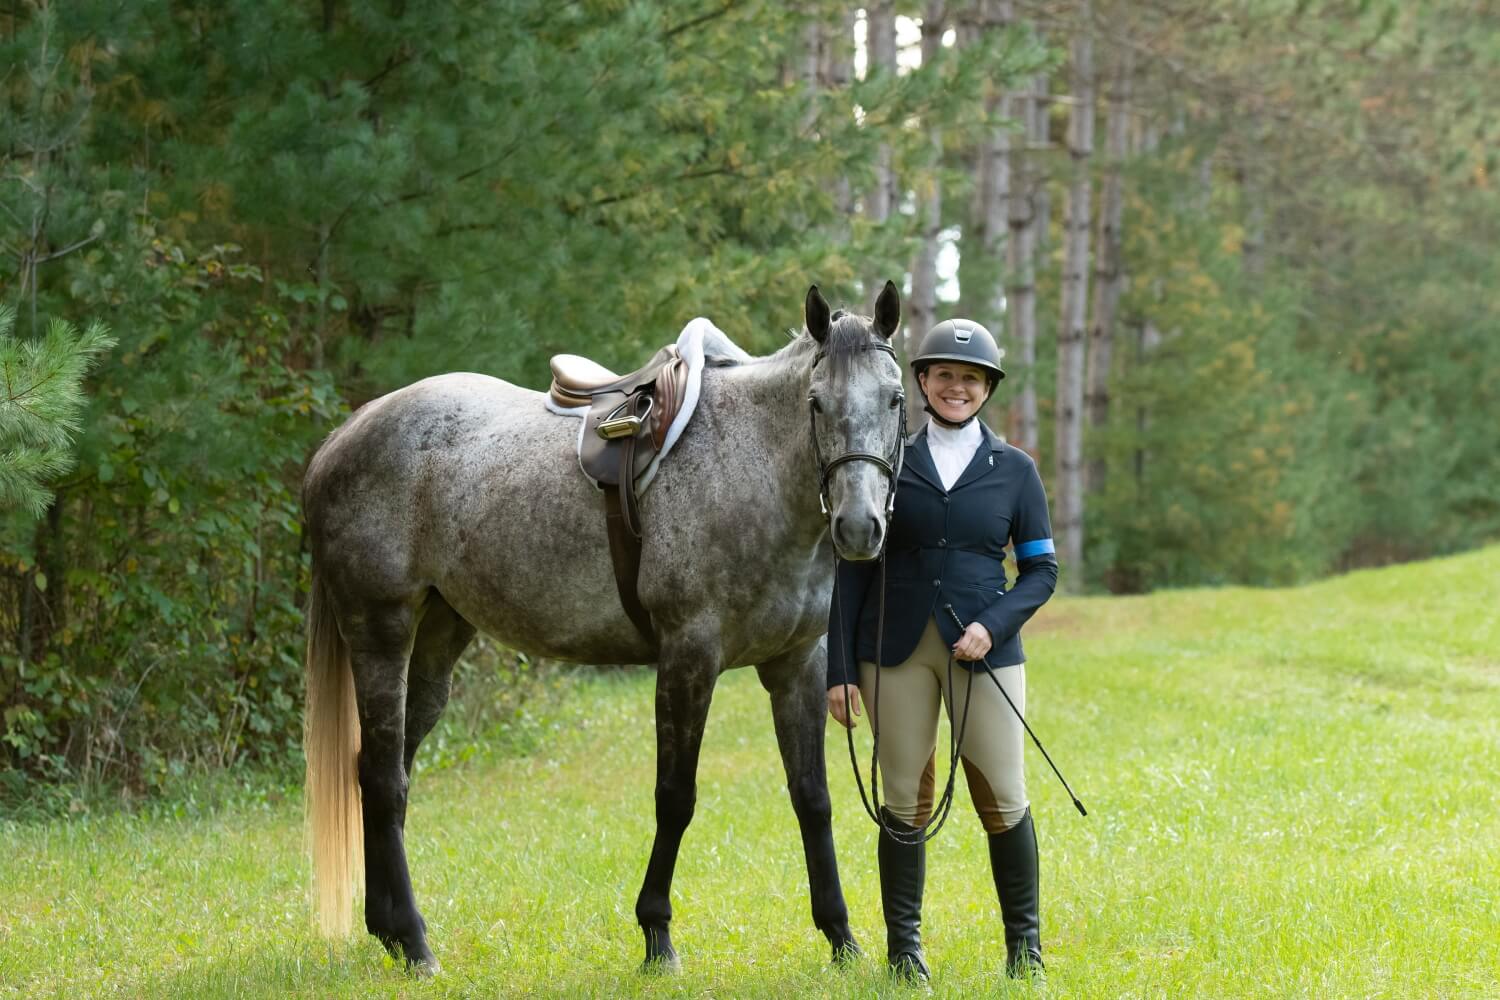 Rider in traditional English uniform posing by a Thoroughbred horse in a forest clearing